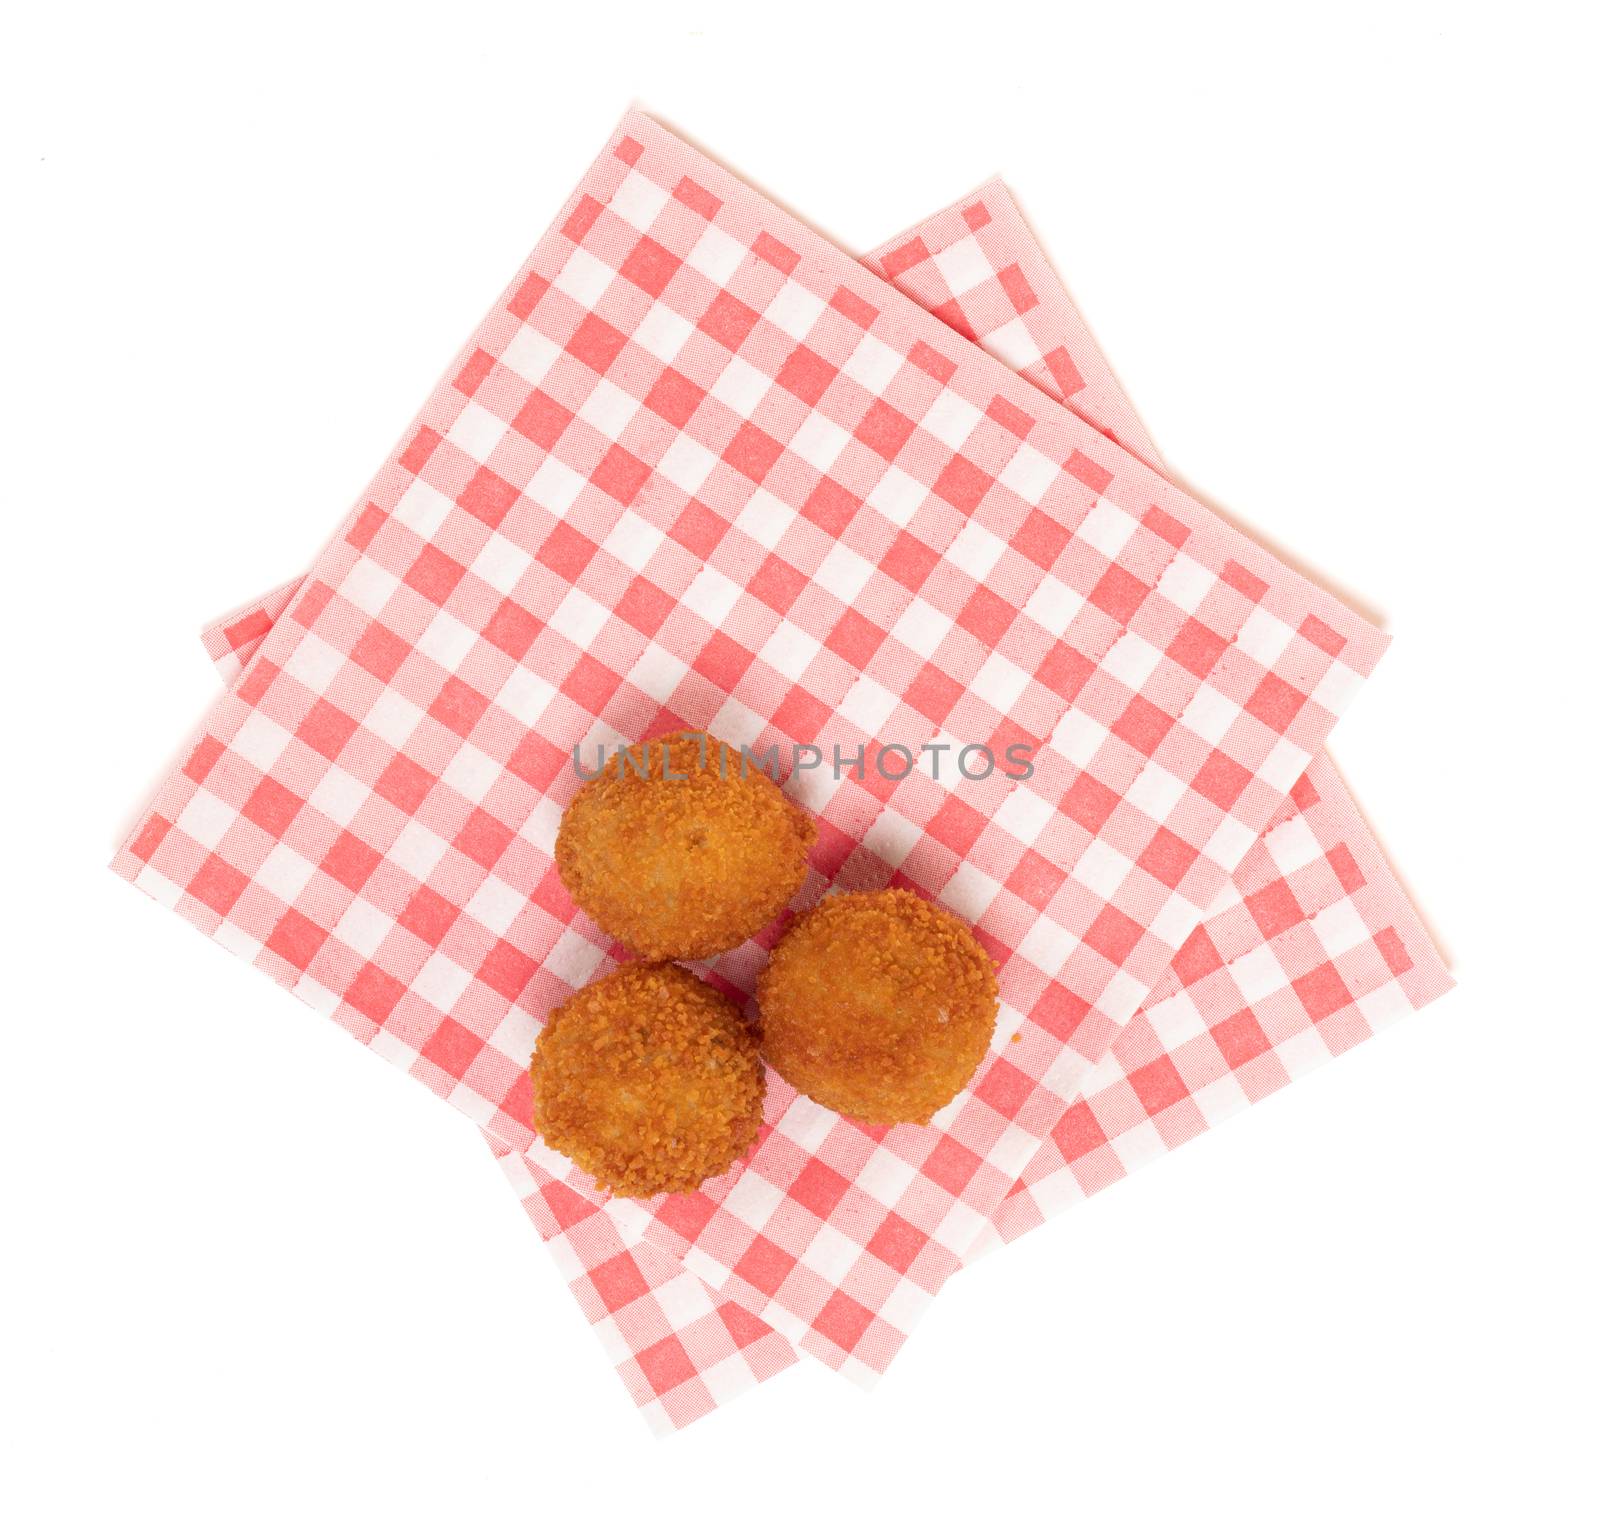 Dutch traditional snack bitterbal on a red and white napkin by michaklootwijk